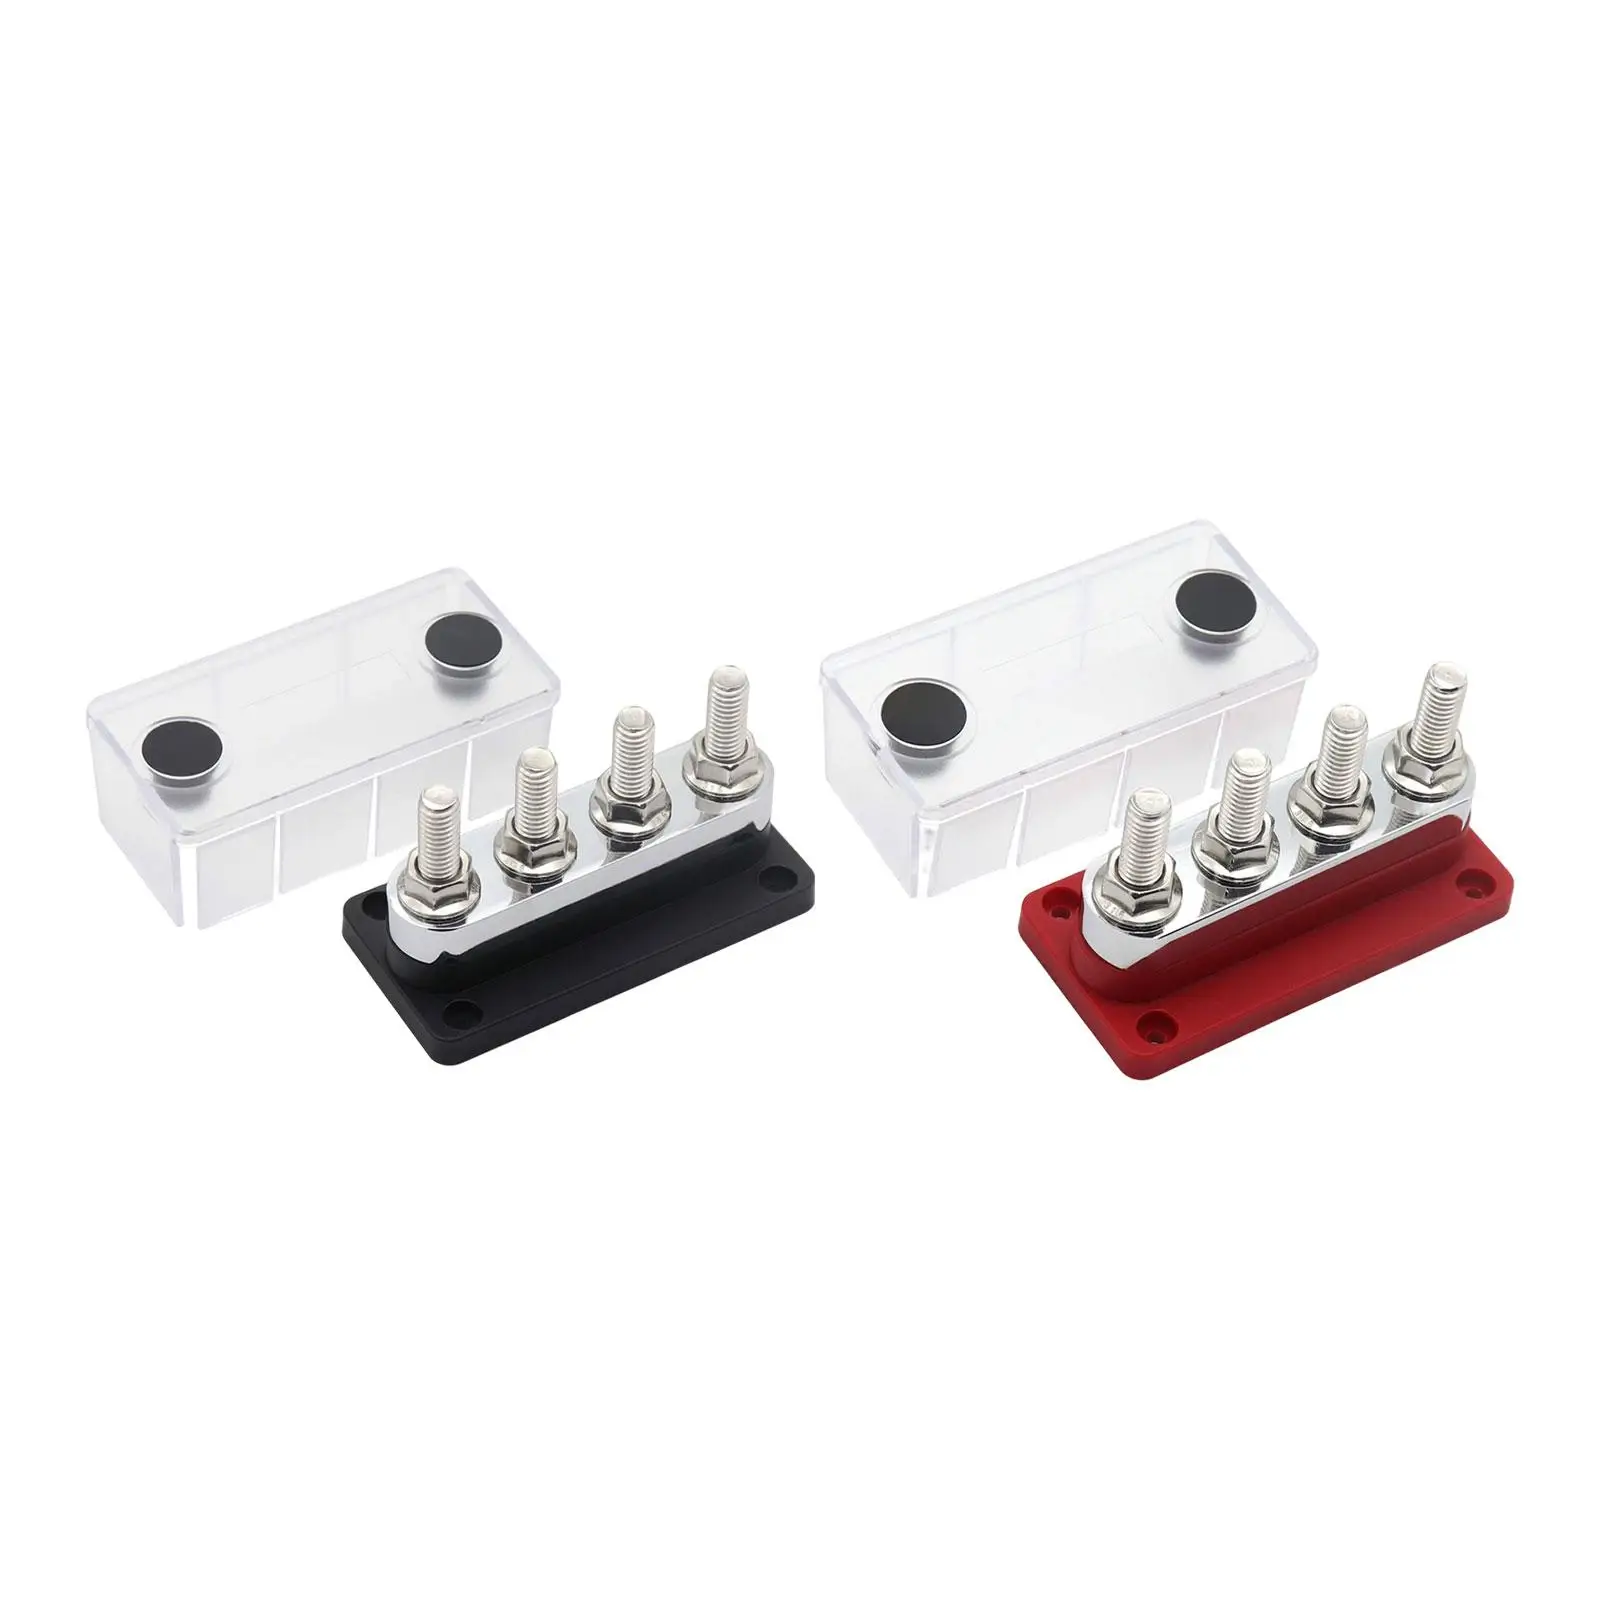 

Bus Bar Power Distribution Block 4x 3/8inch Terminal Studs Also Available in 5/16inch Heavy Duty Busbar for Marine Boat Car